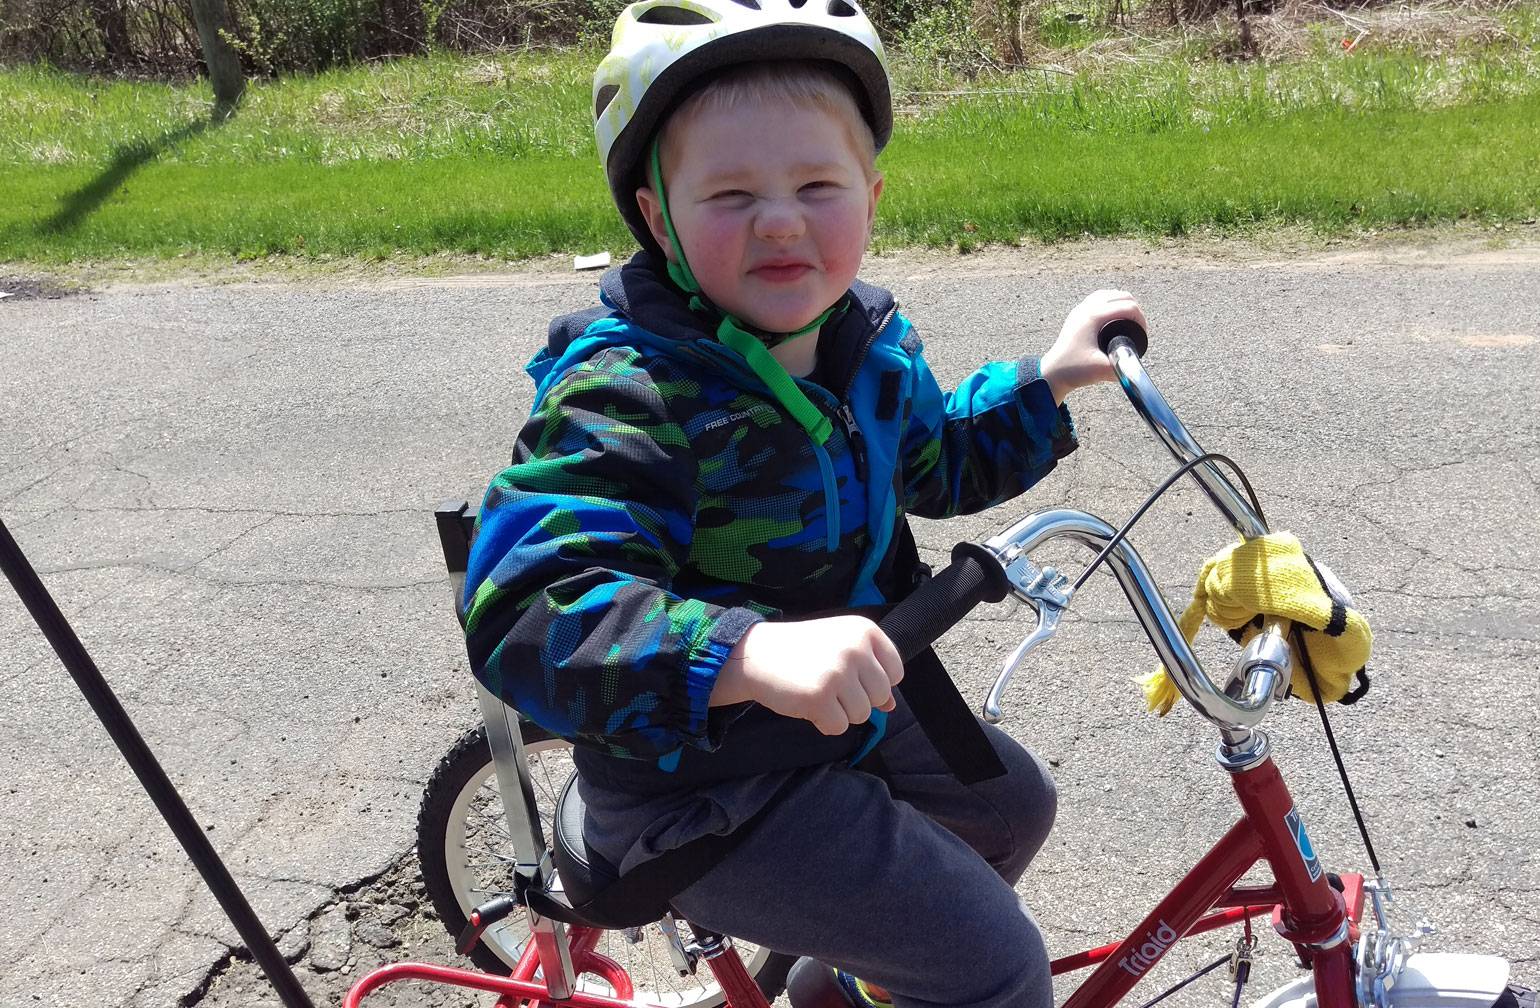 Gavin takes his new adapted bike for a spin